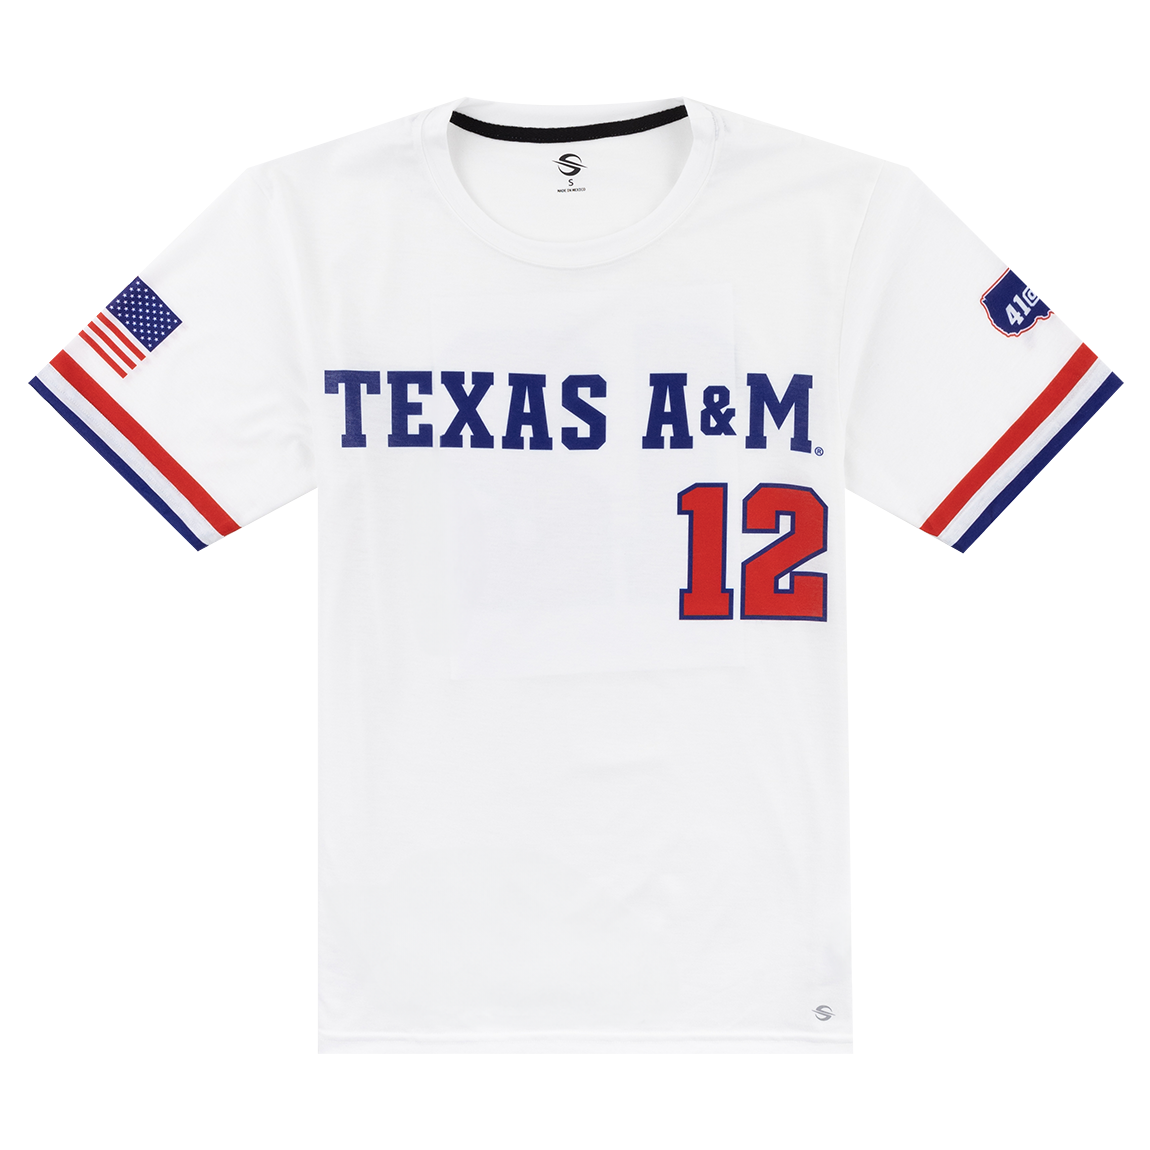 Texas A&M Red White And Blue Baseball T-Shirt